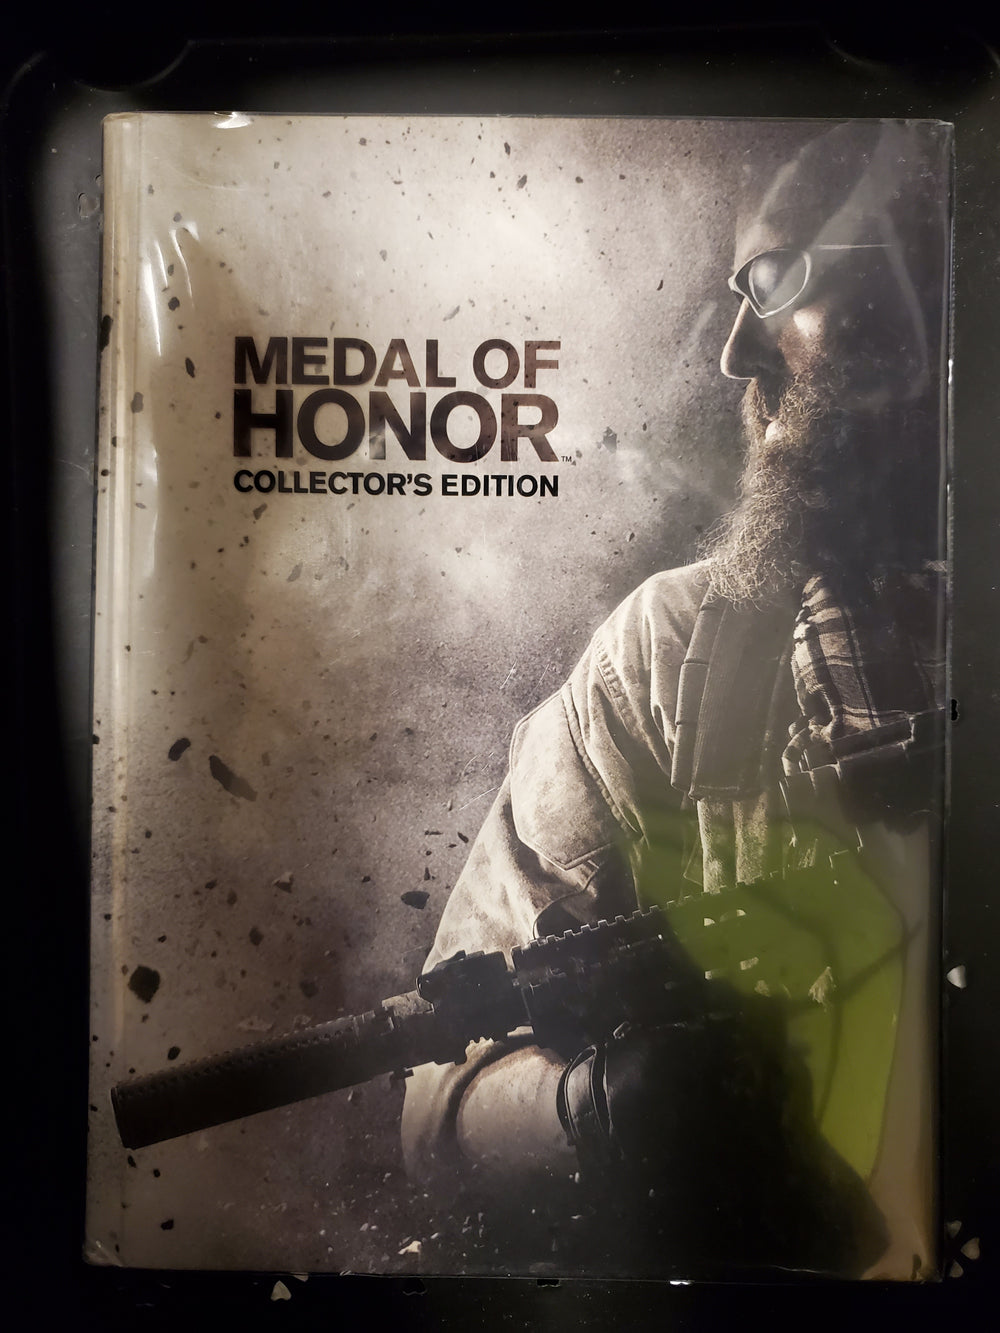 GAME GUIDES - MEDAL OF HONOR (COLLECTOR'S EDITION)